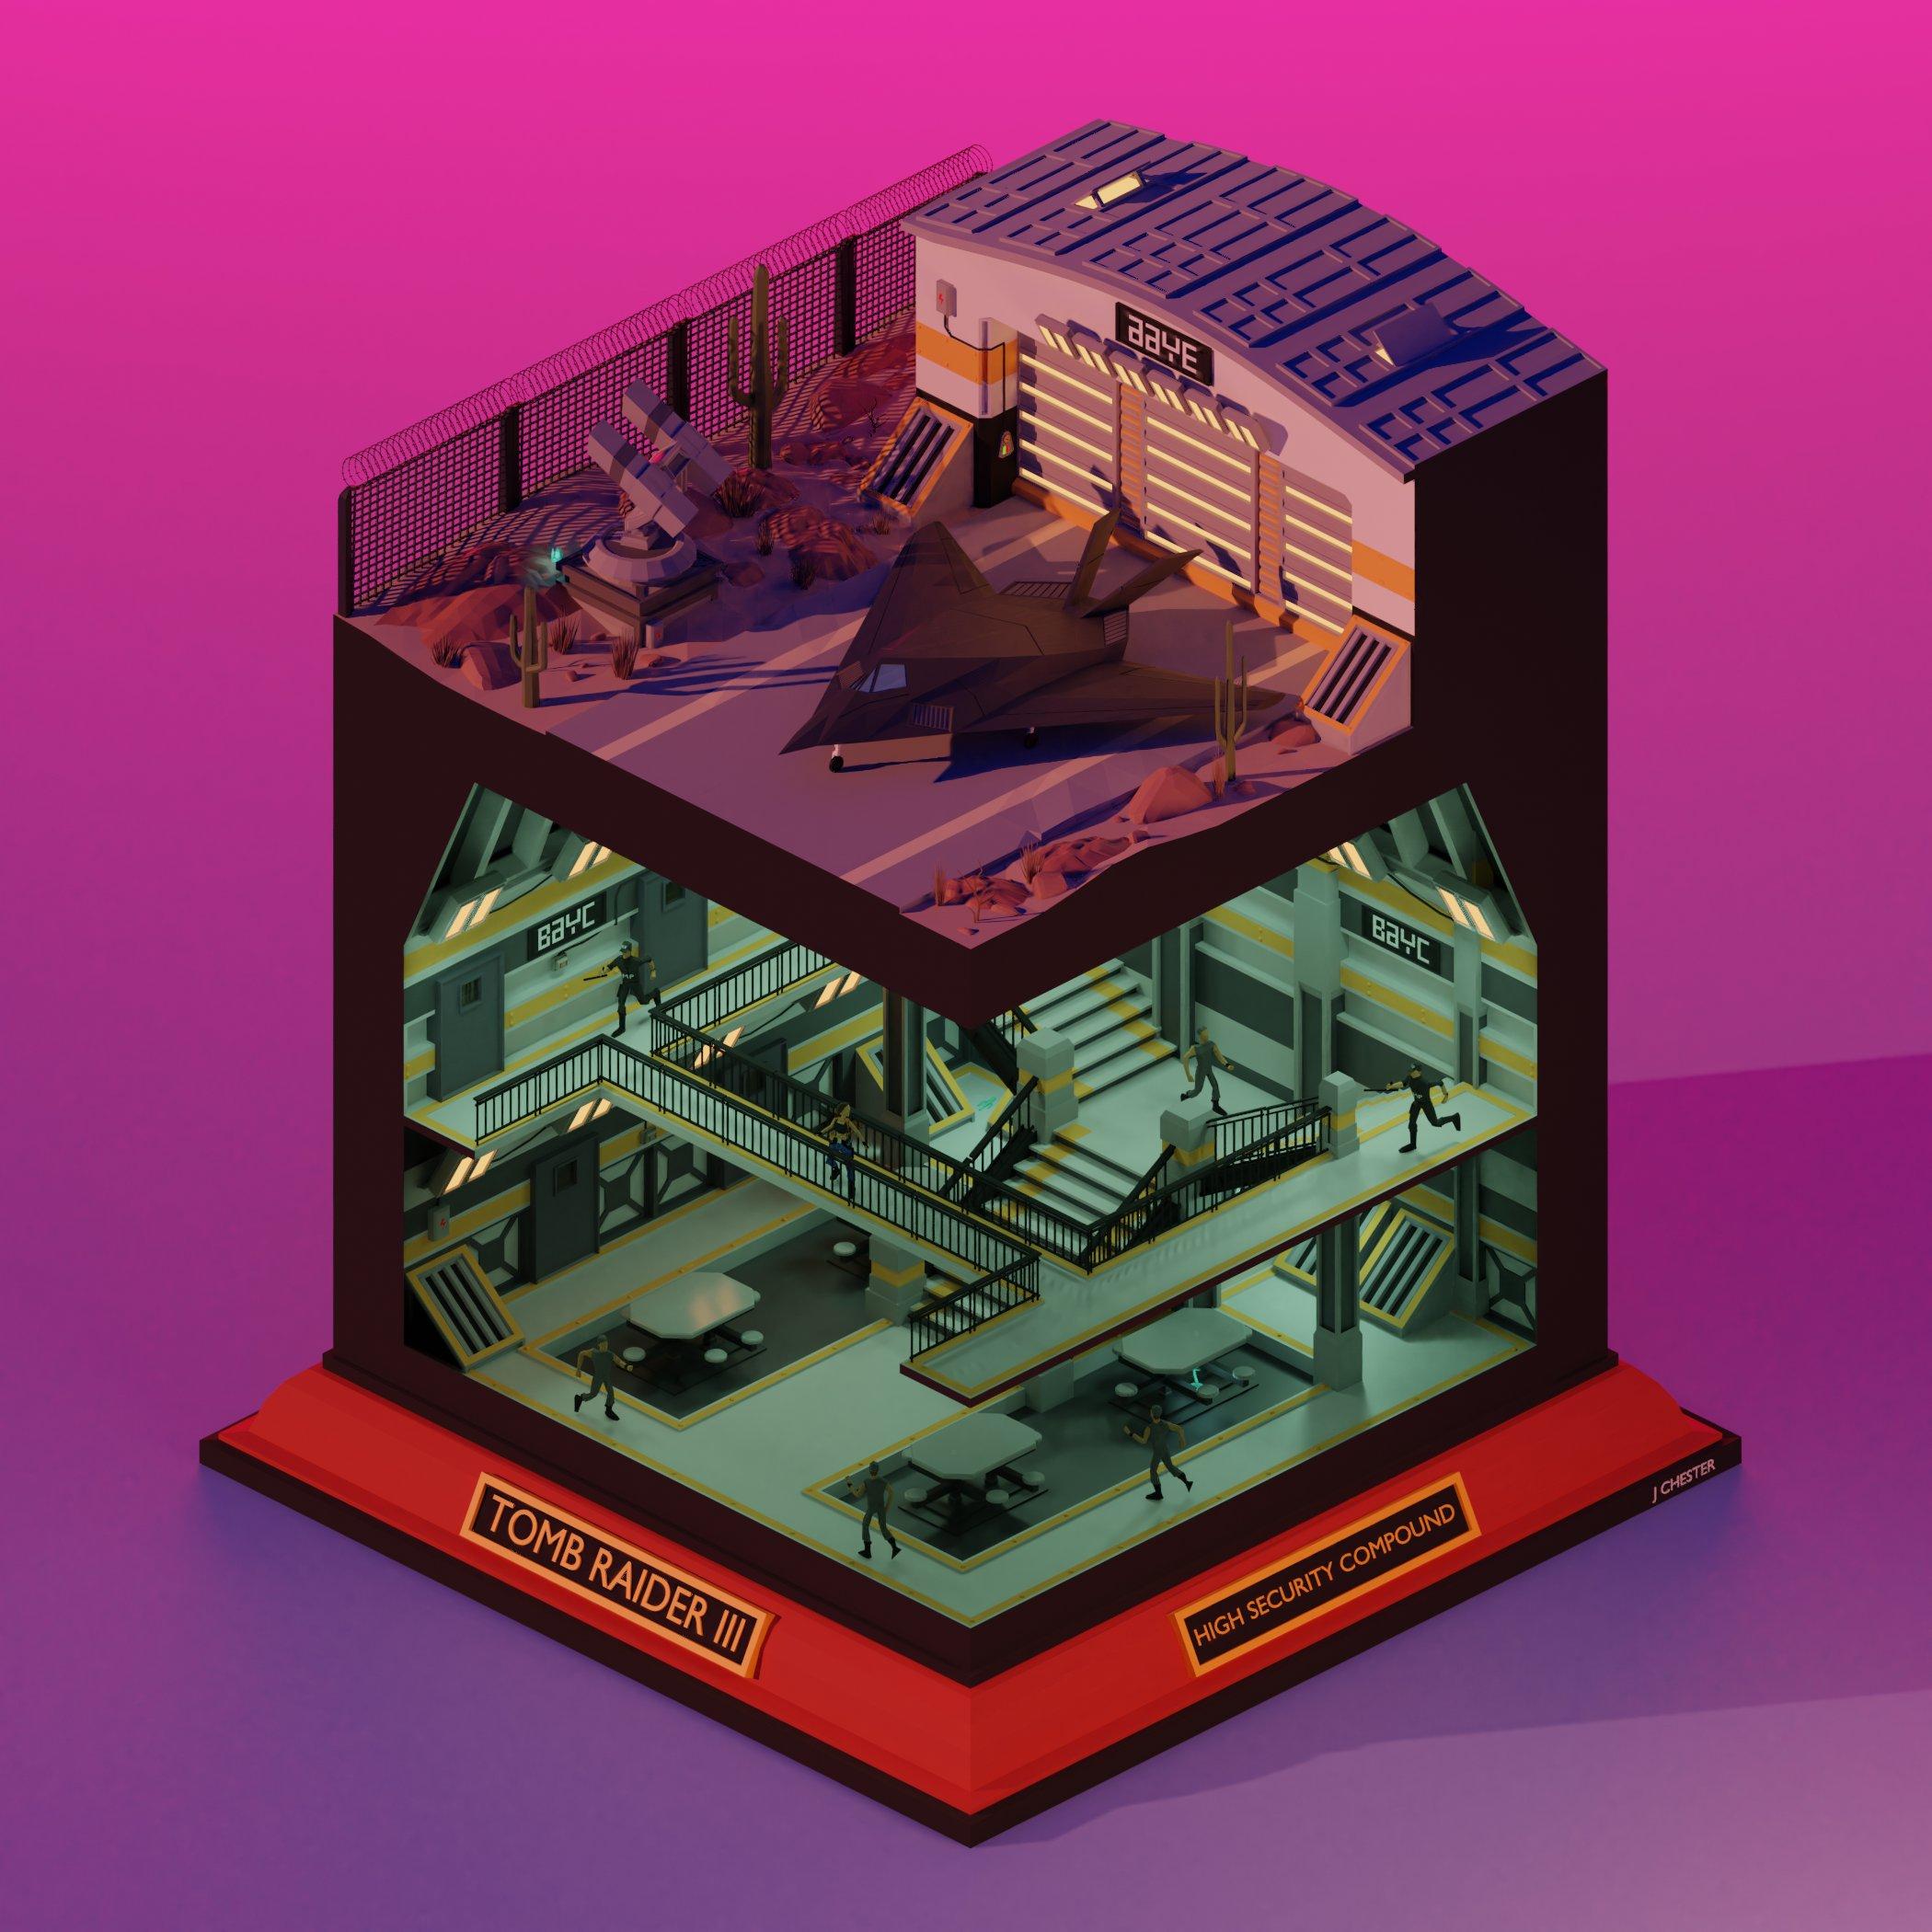 ‘Reimagined Low Poly diorama’ level series by Jason Chester - TR3 - High Security Compound